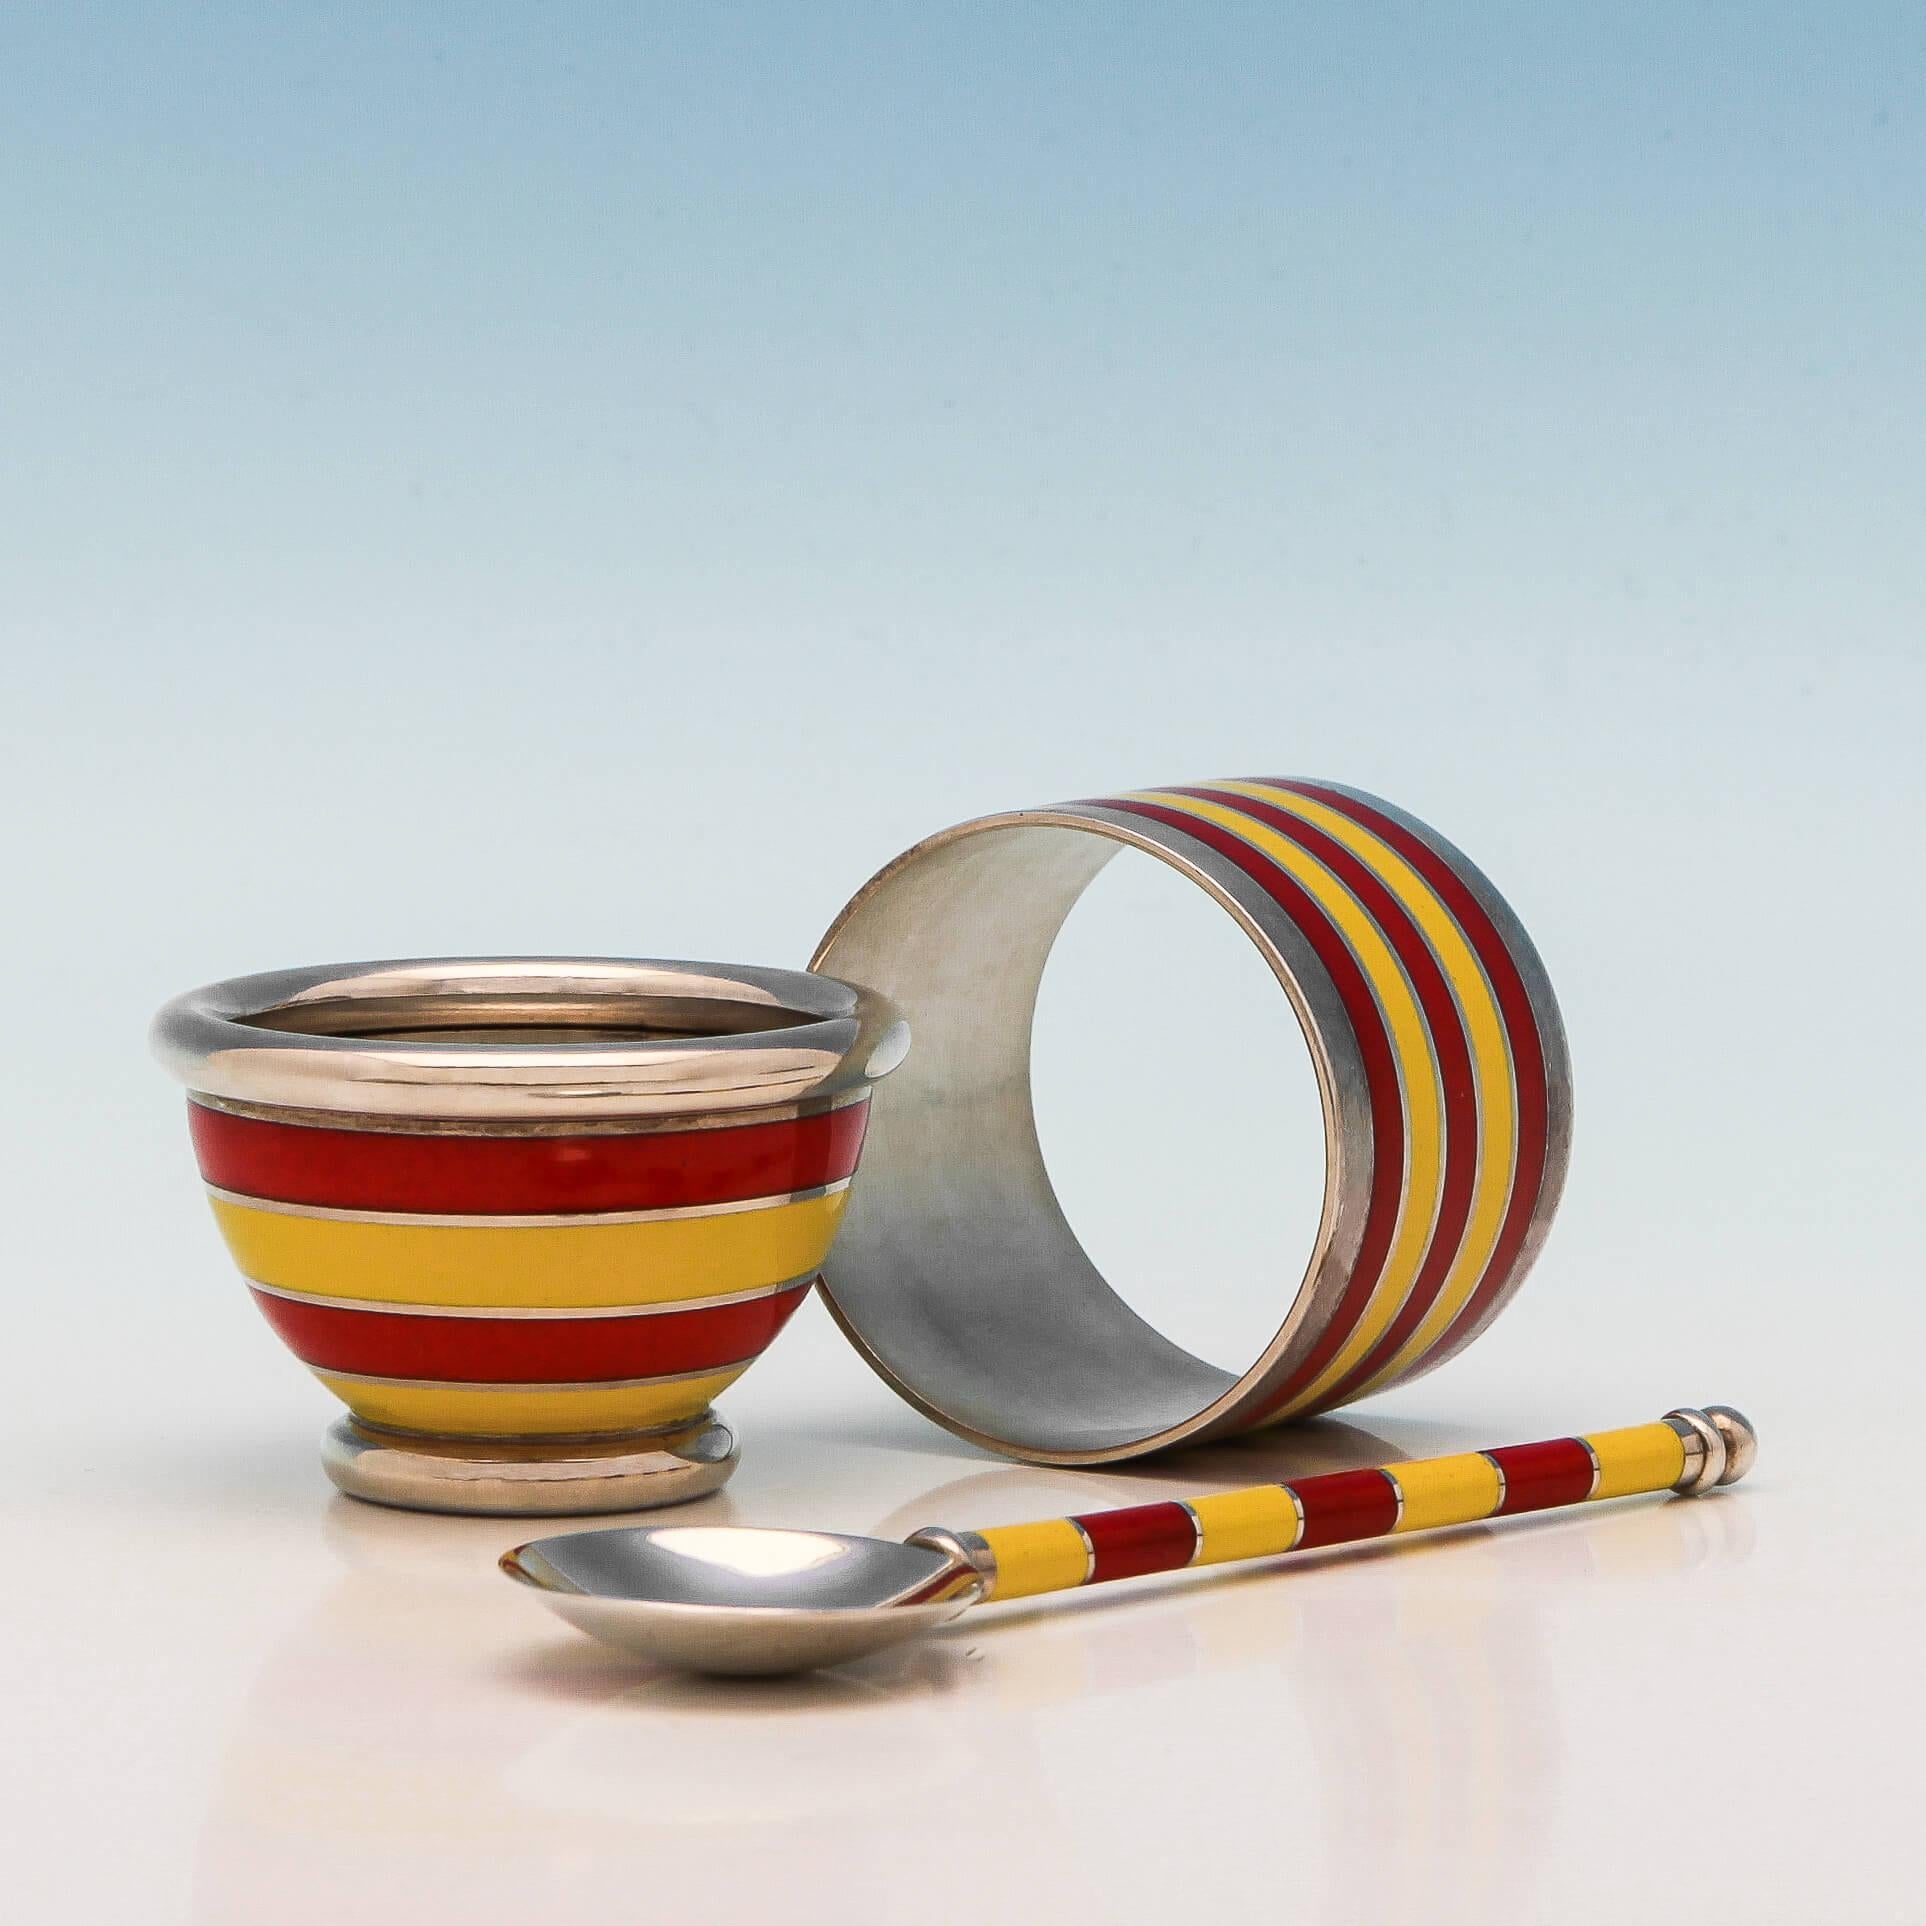 Hallmarked in London in 1995, this fabulous, modern, Elizabeth II, sterling silver child's set comprises of an egg cup, an egg spoon and a napkin ring, decorated with yellow and red striped enamel and presented in a fitted box. The egg cup is